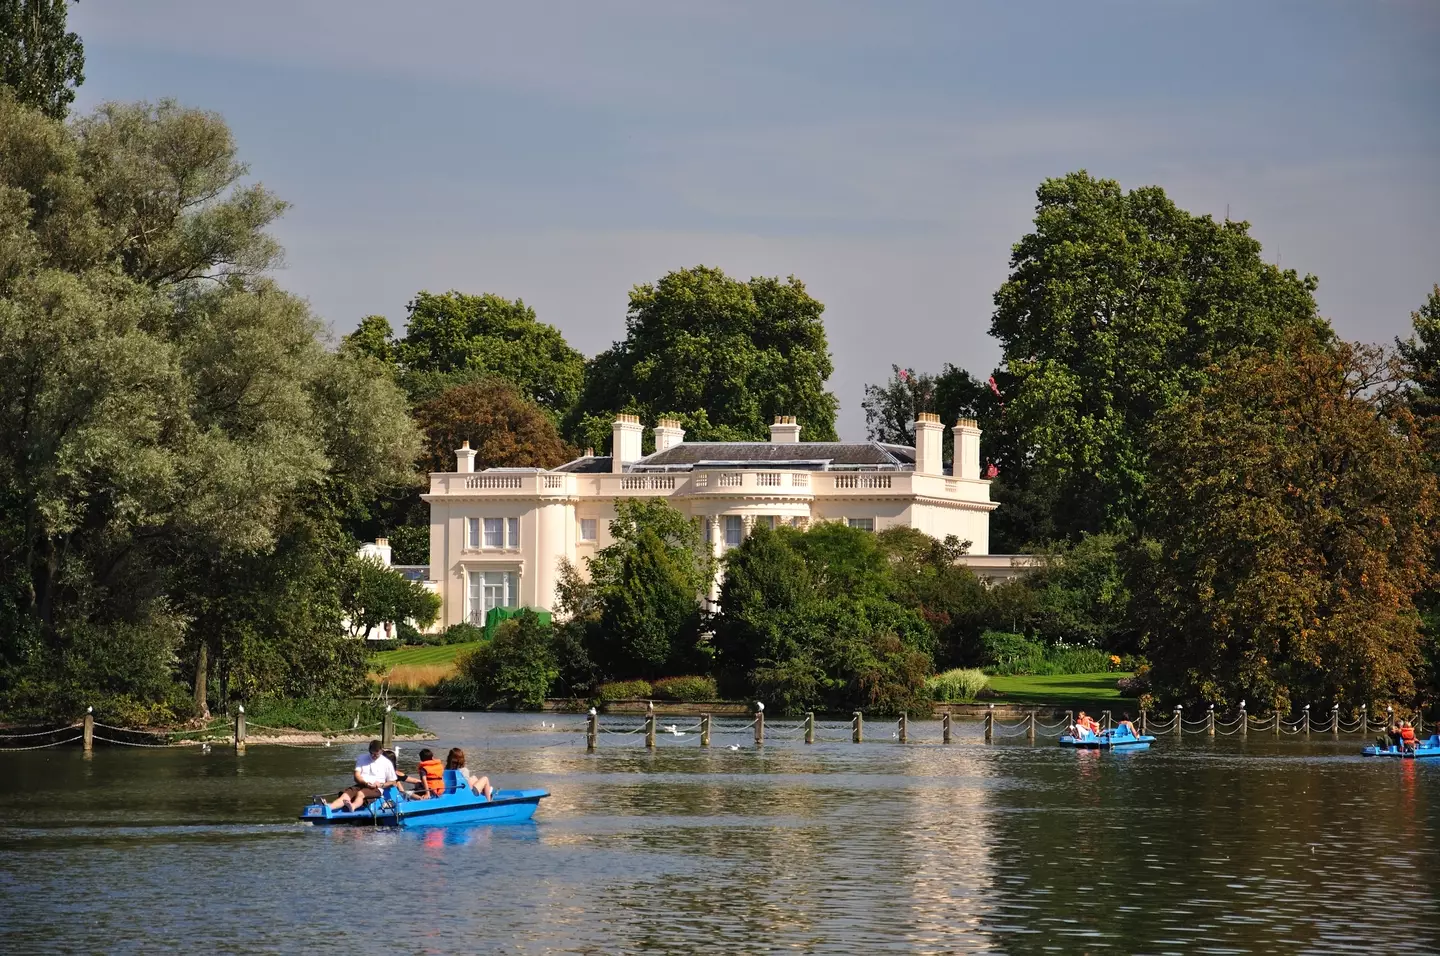 The Holme is set within Regent's Park.